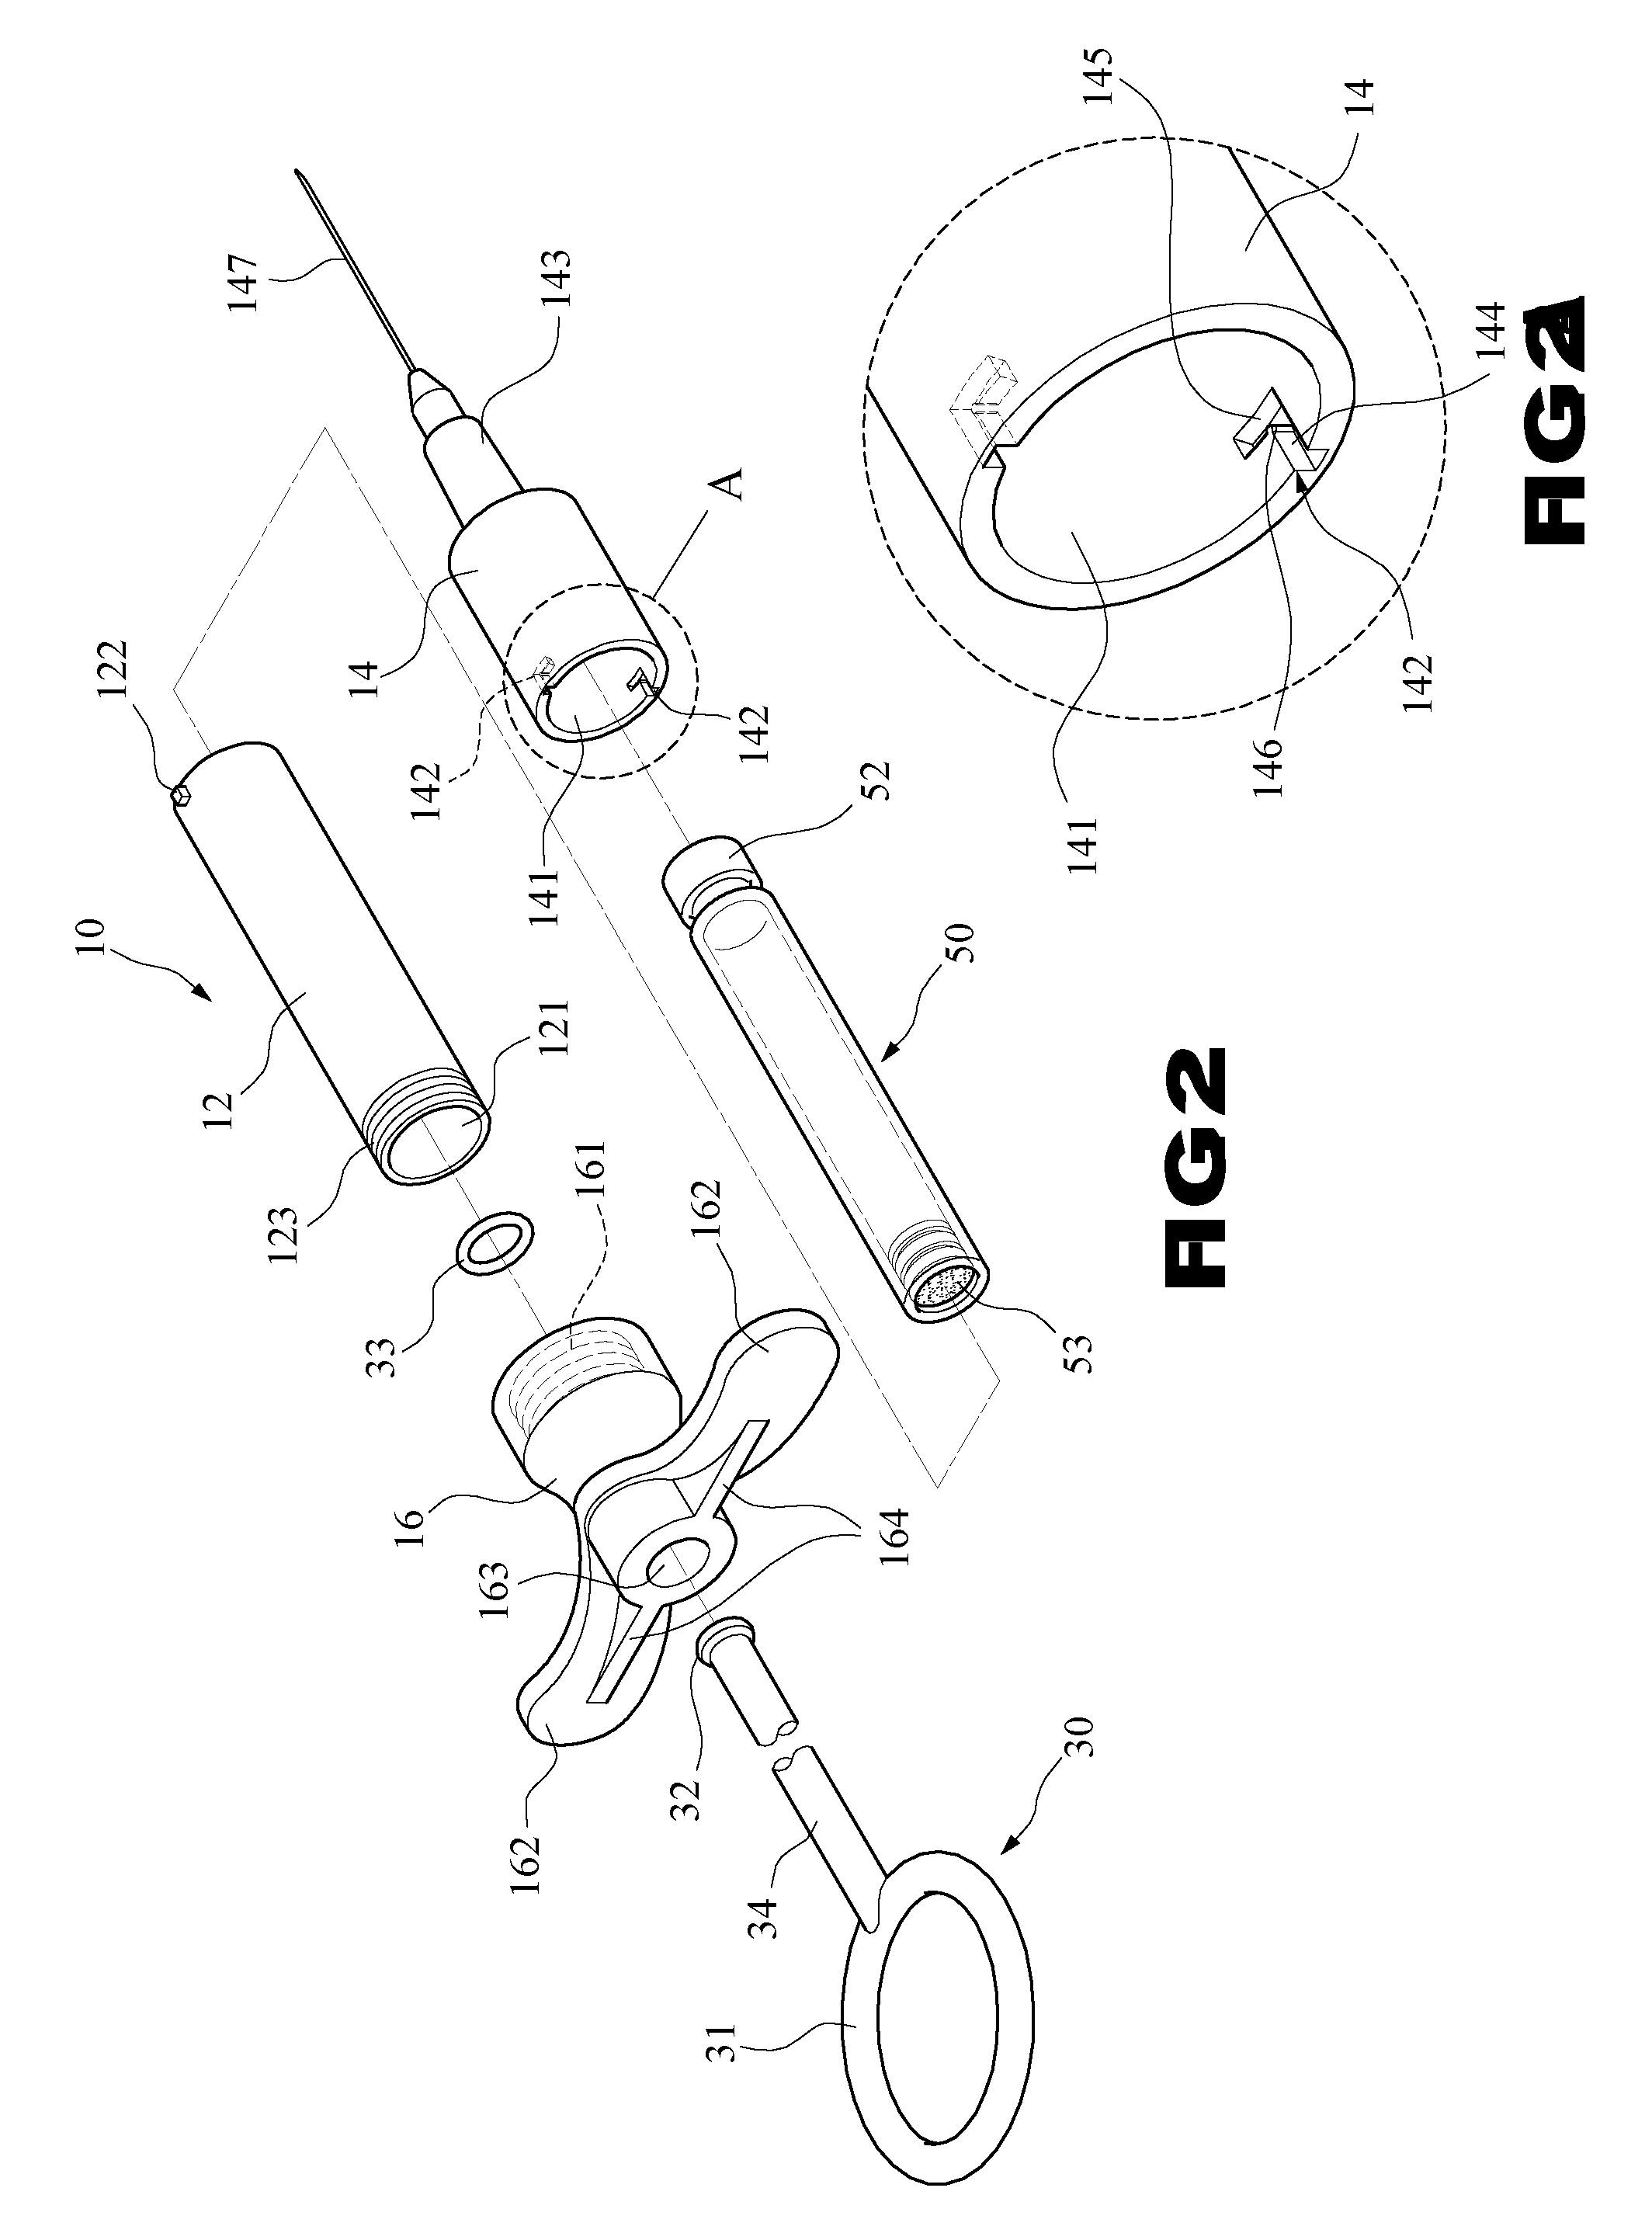 Safety syringe with disposable components after use